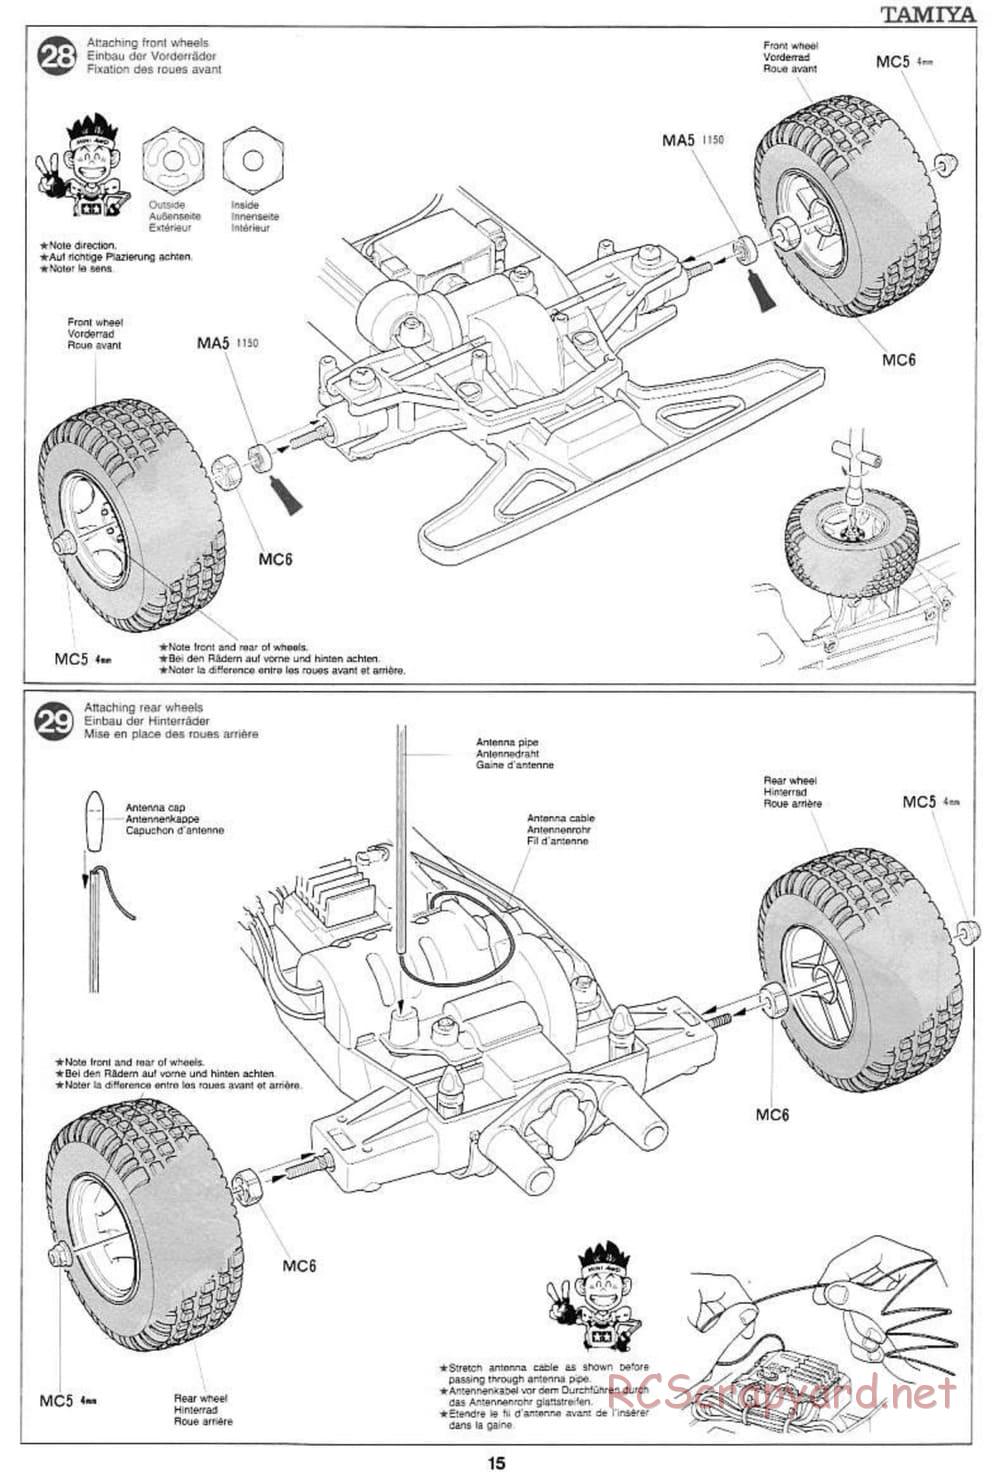 Tamiya - Wild Ceptor - Boy's 4WD Chassis - Manual - Page 15